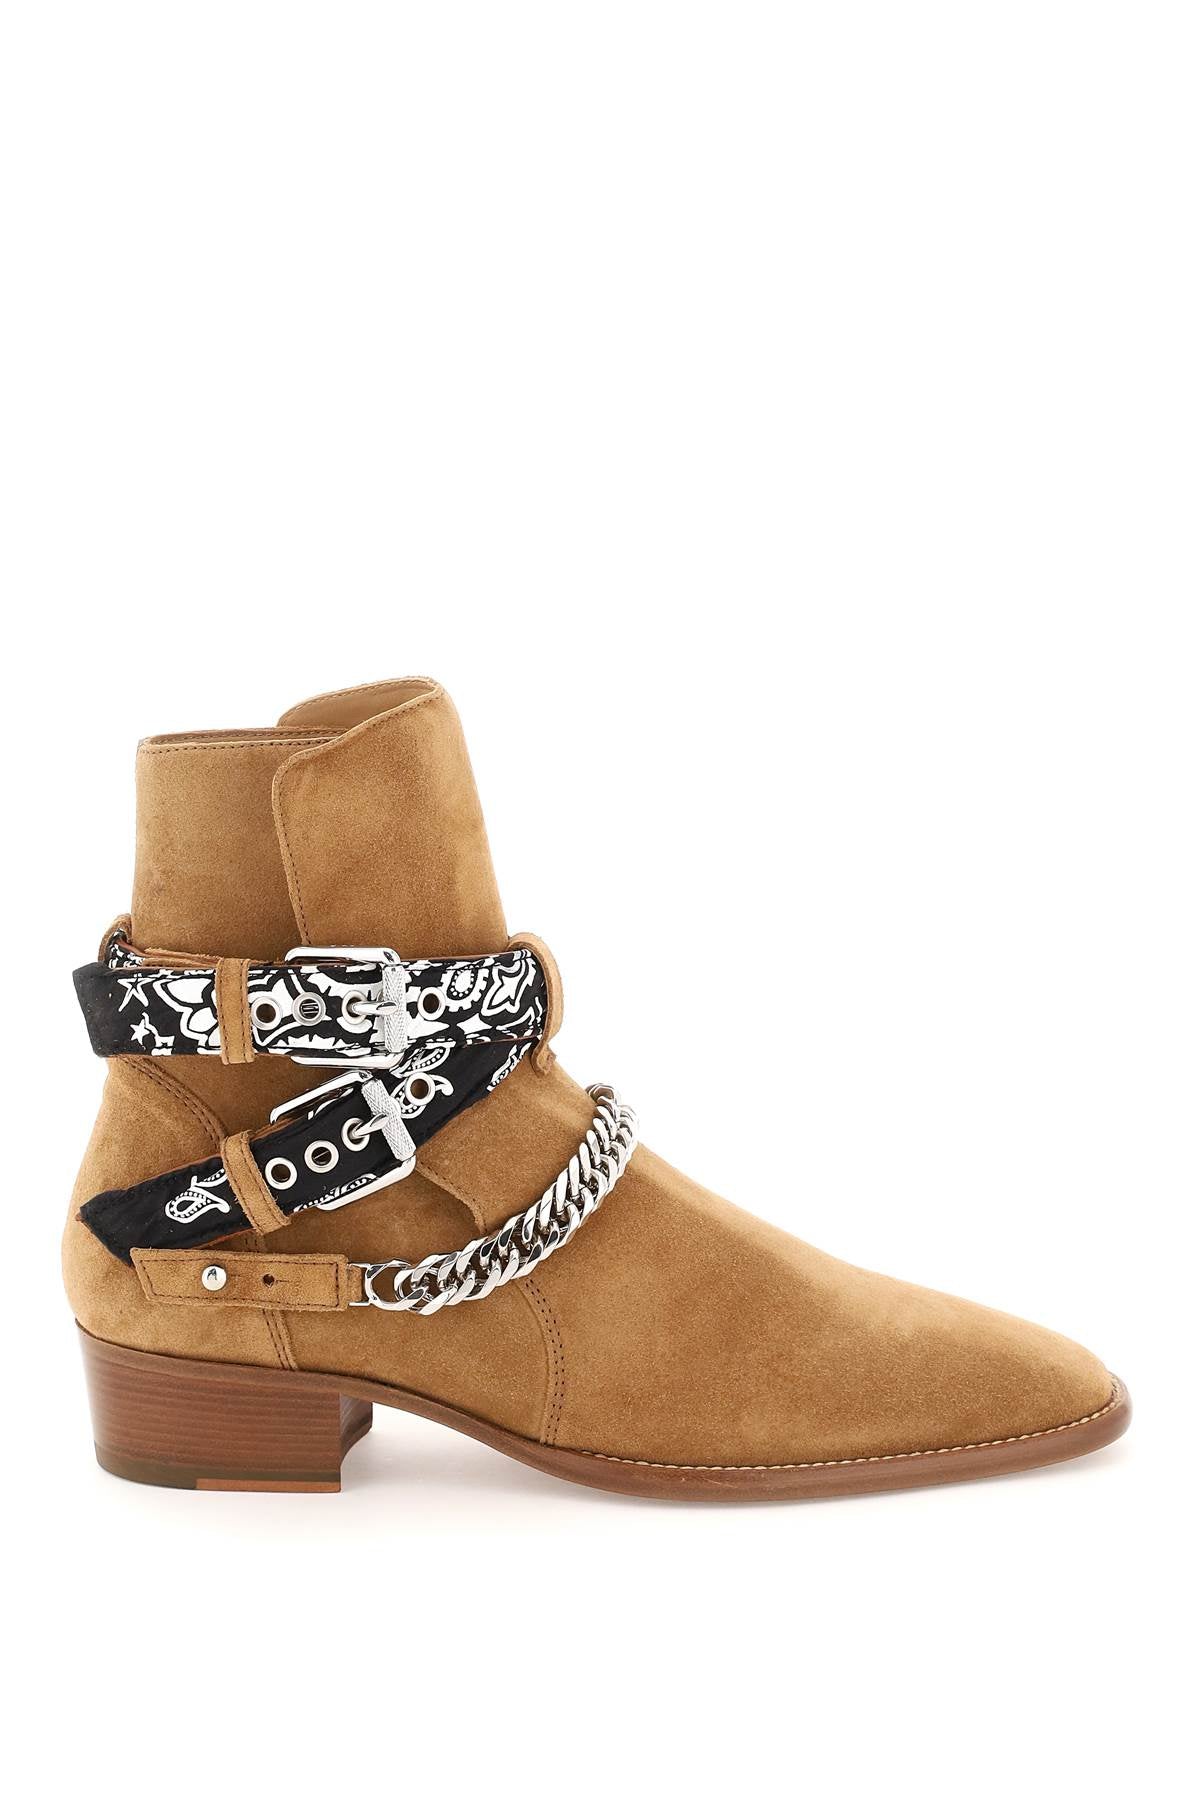 Suede Boots with Bandana Ankle Straps for Men